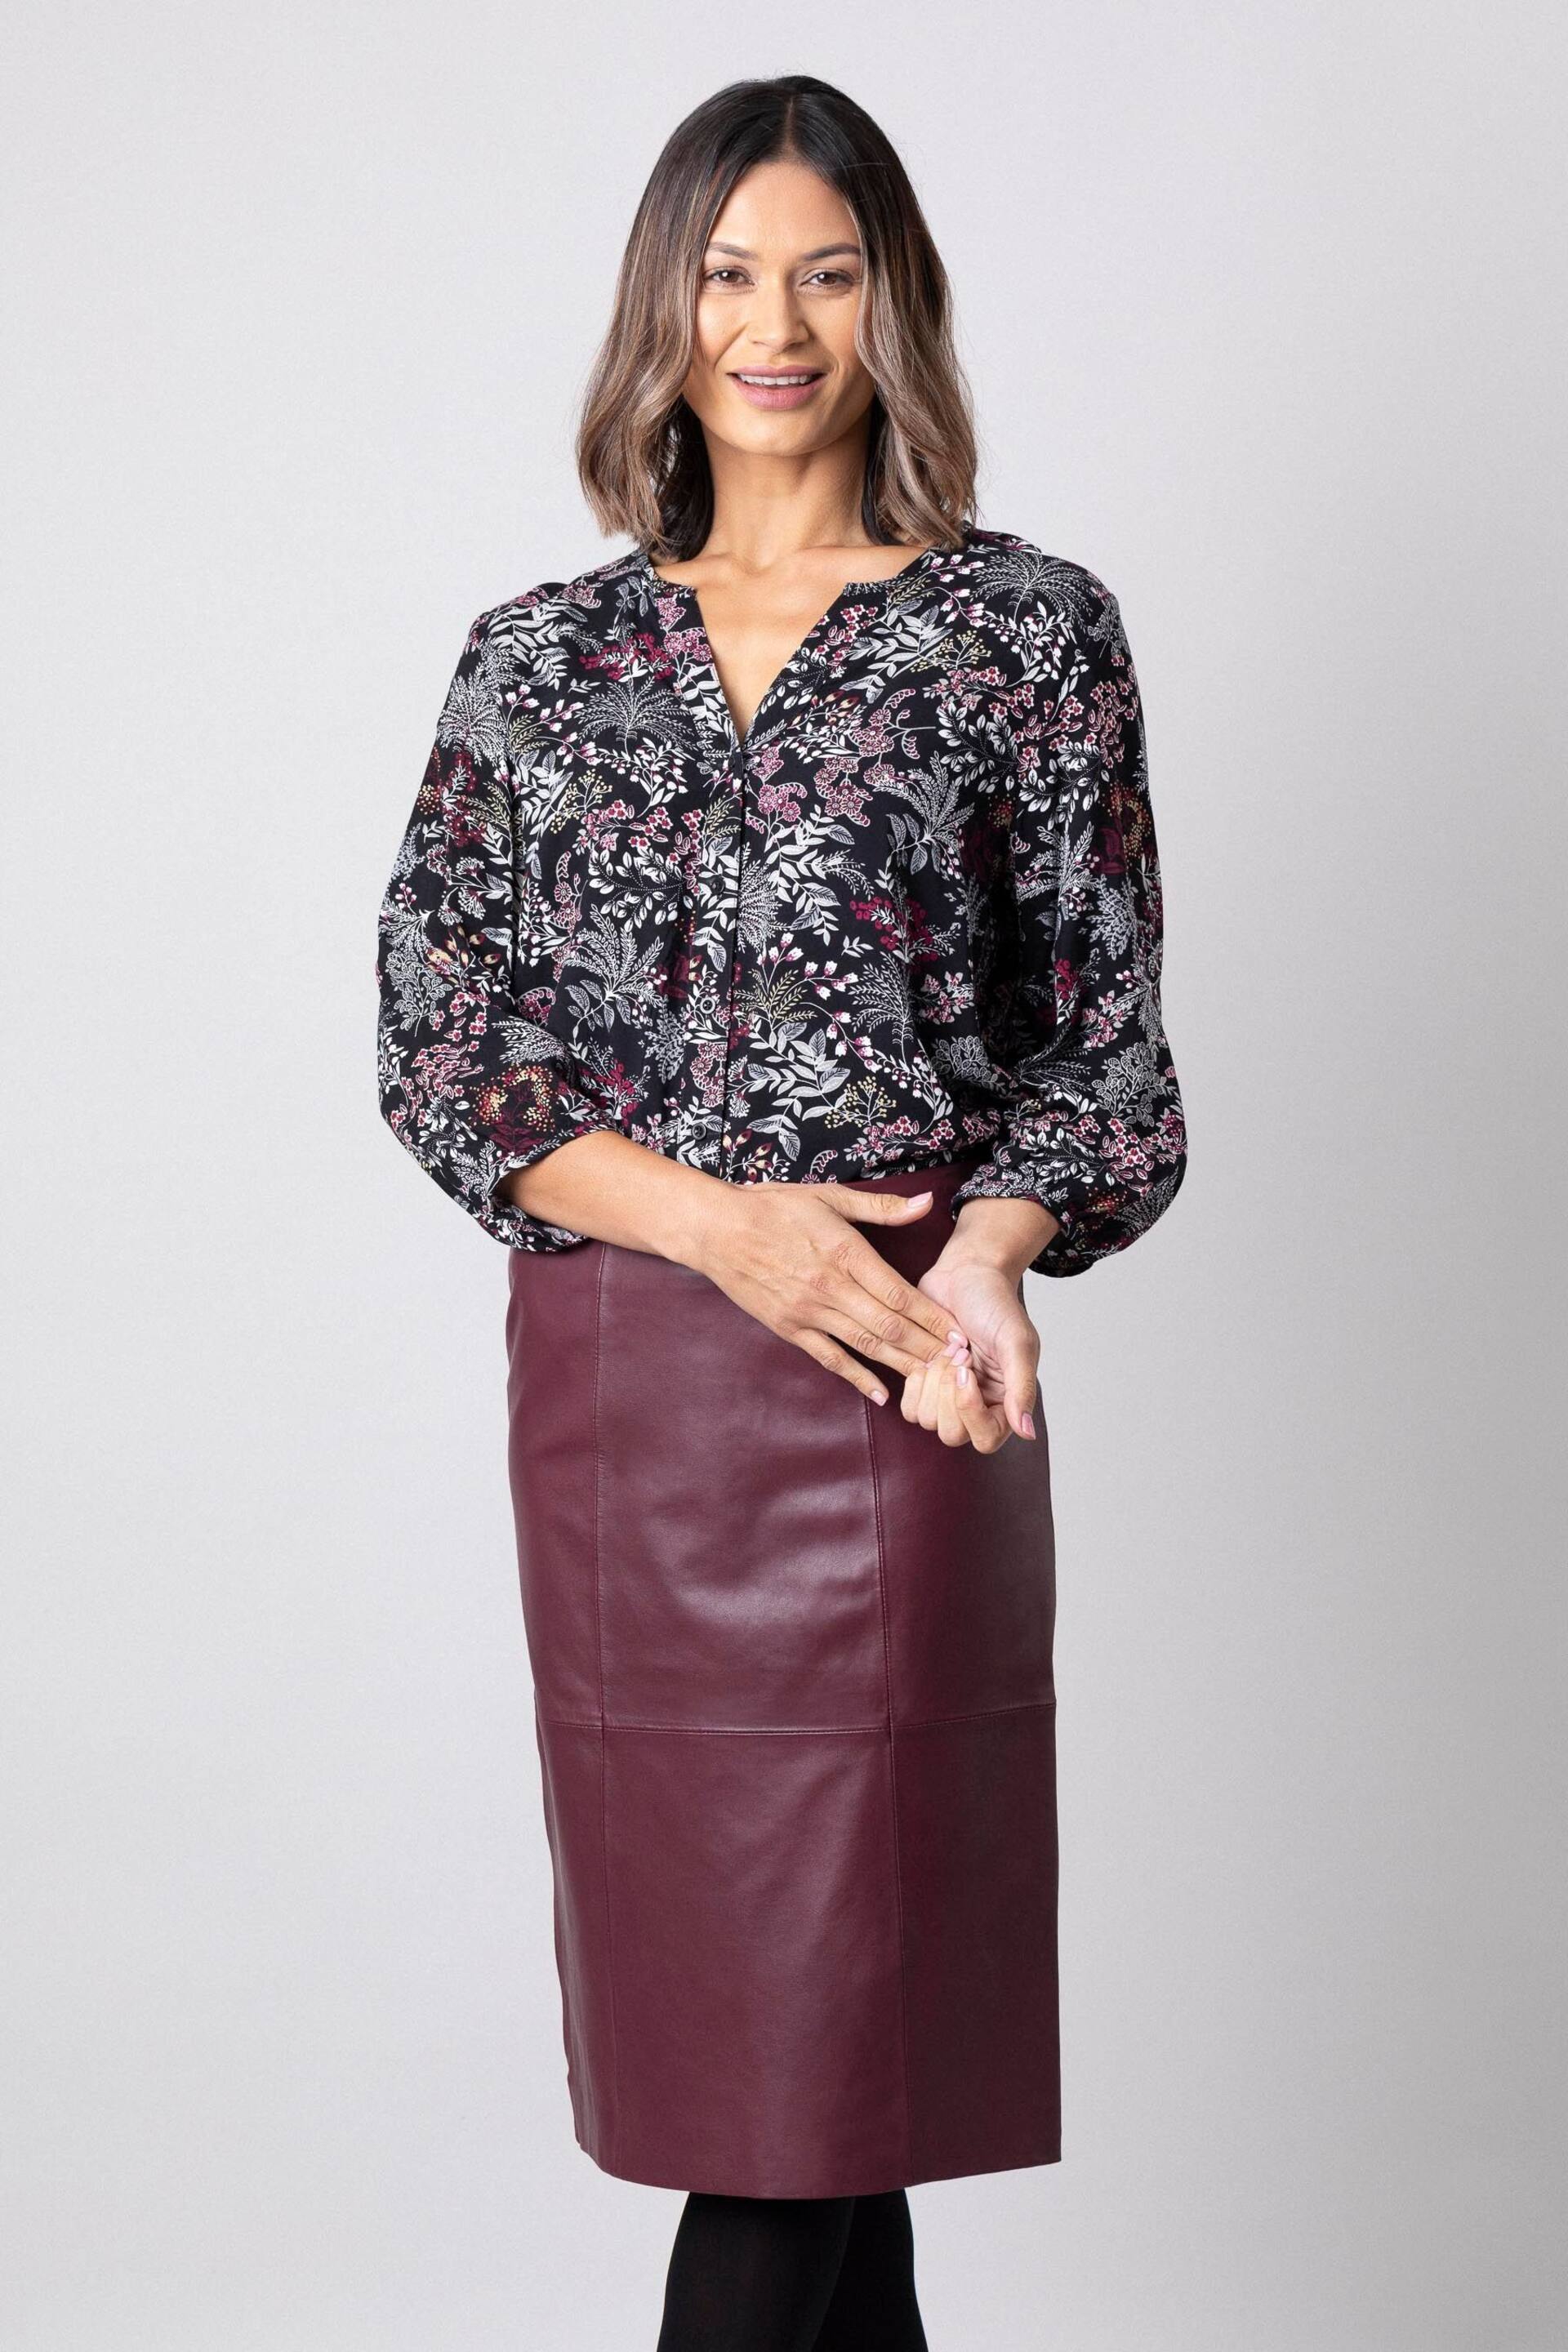 Lakeland Leather High Waisted Leather Pencil Skirt - Image 5 of 8